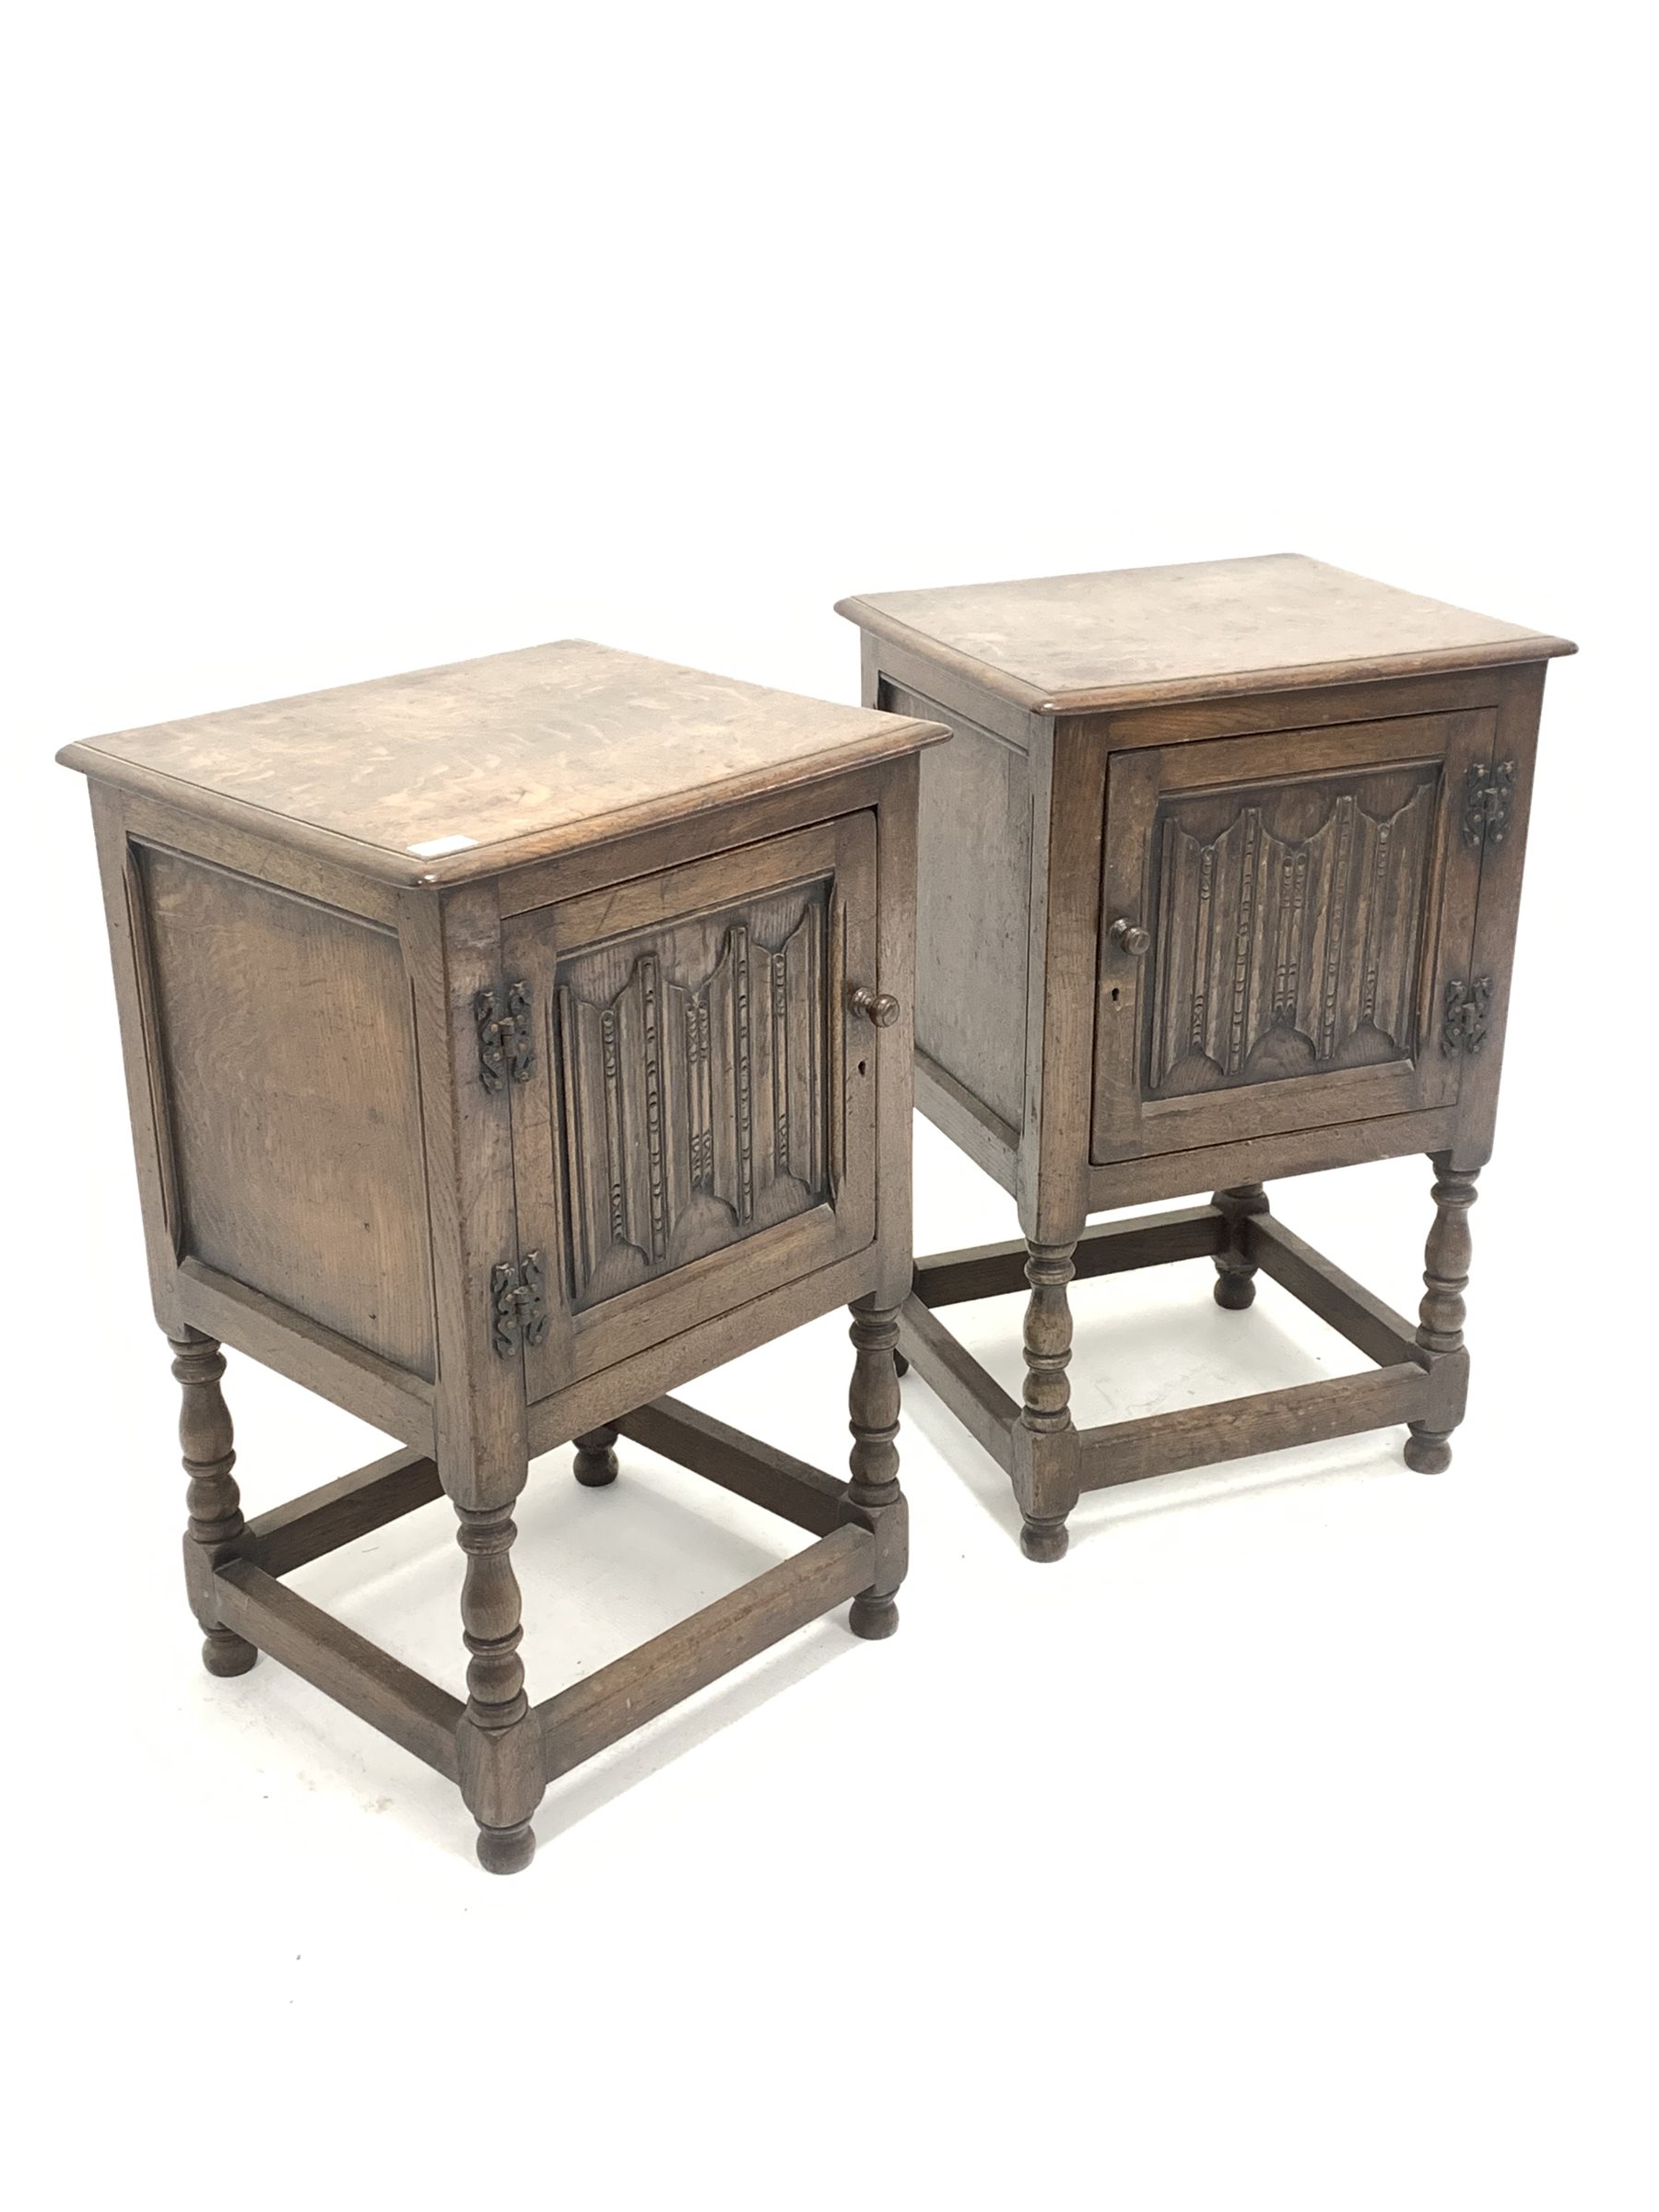 Pair of early 20th century oak bedside cupboards, with fielded panelled doors carved with linen fold